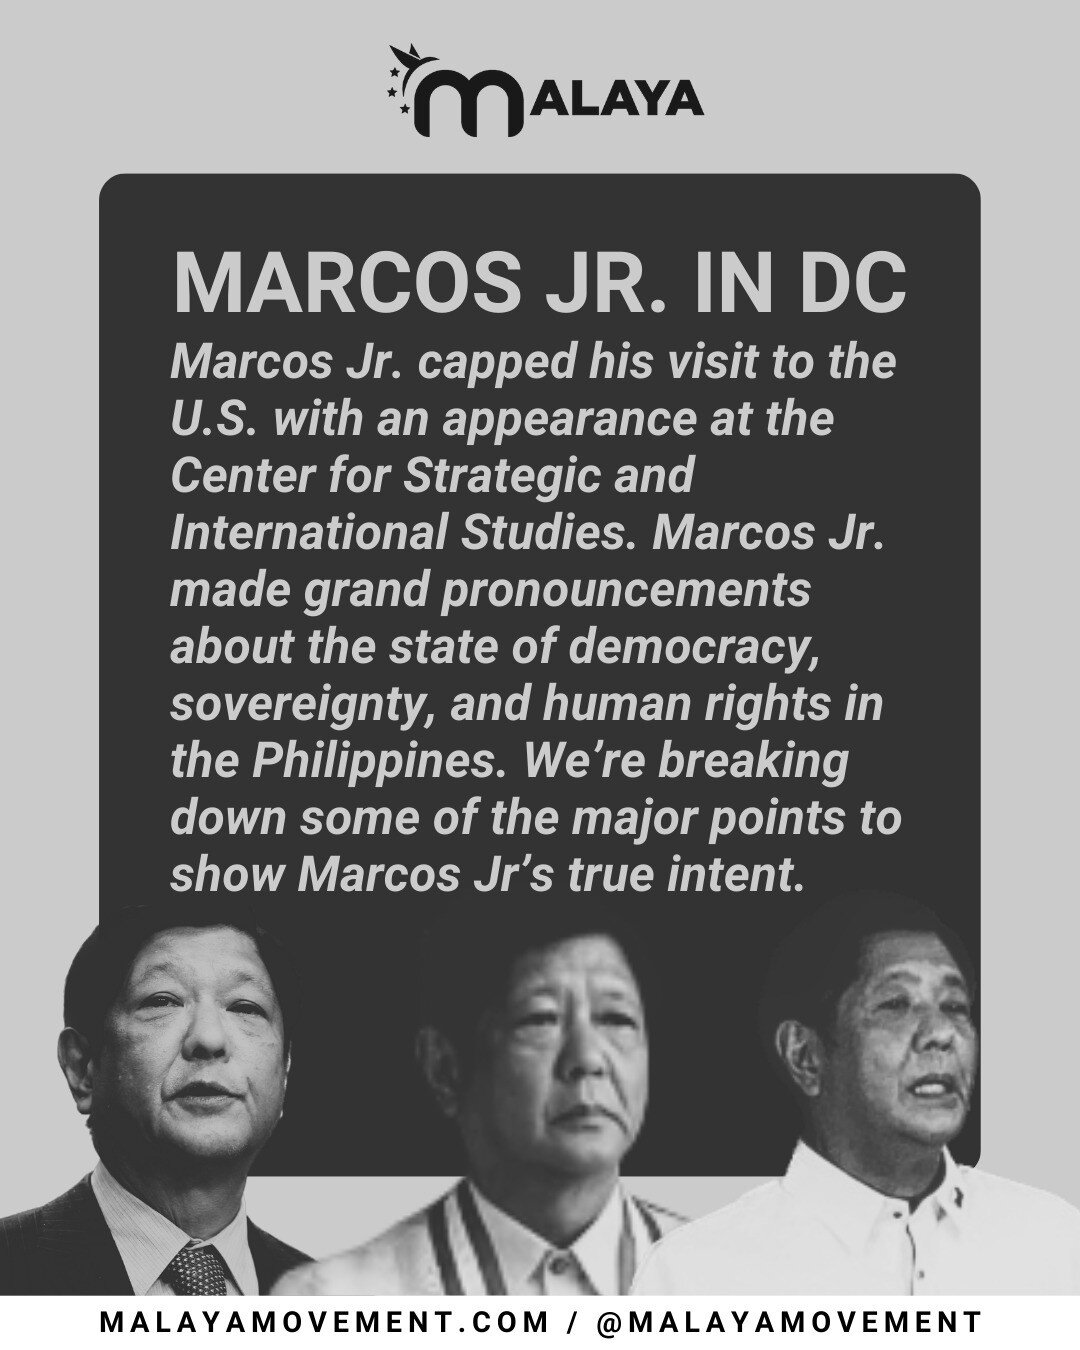 Marcos Jr. capped his visit to the U.S. with an appearance at the Center for Strategic and International Studies. Marcos Jr. made grand pronouncements about the state of democracy, sovereignty, and human rights in the Philippines. We&rsquo;re breakin